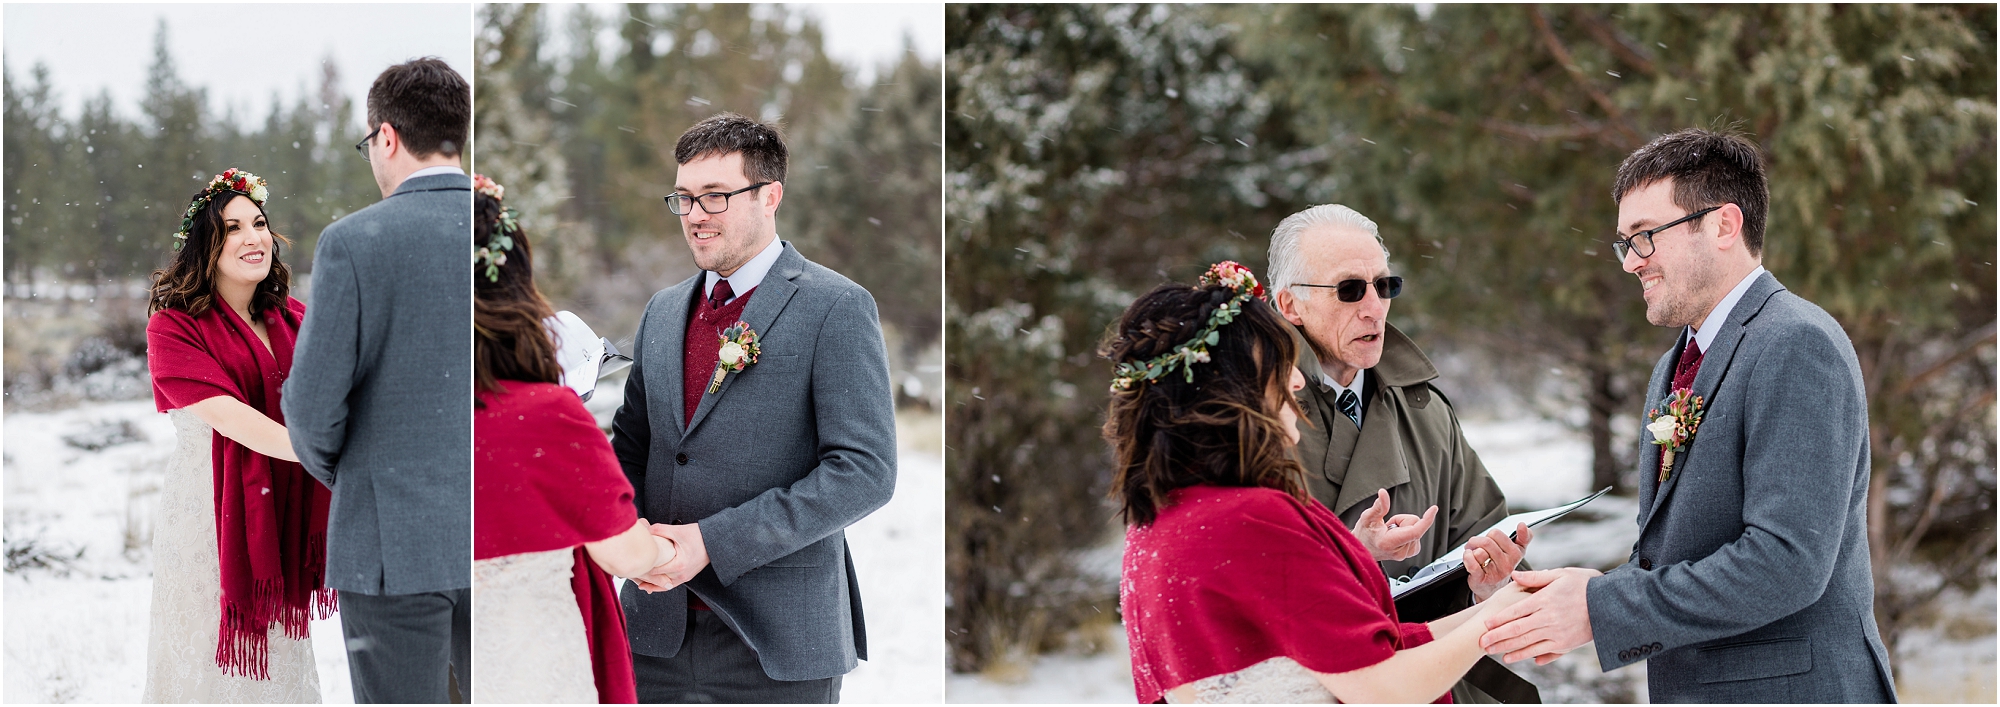 An intimate Central Oregon winter elopement near Five Pine Lodge in Sisters, Oregon. | Erica Swantek Photography